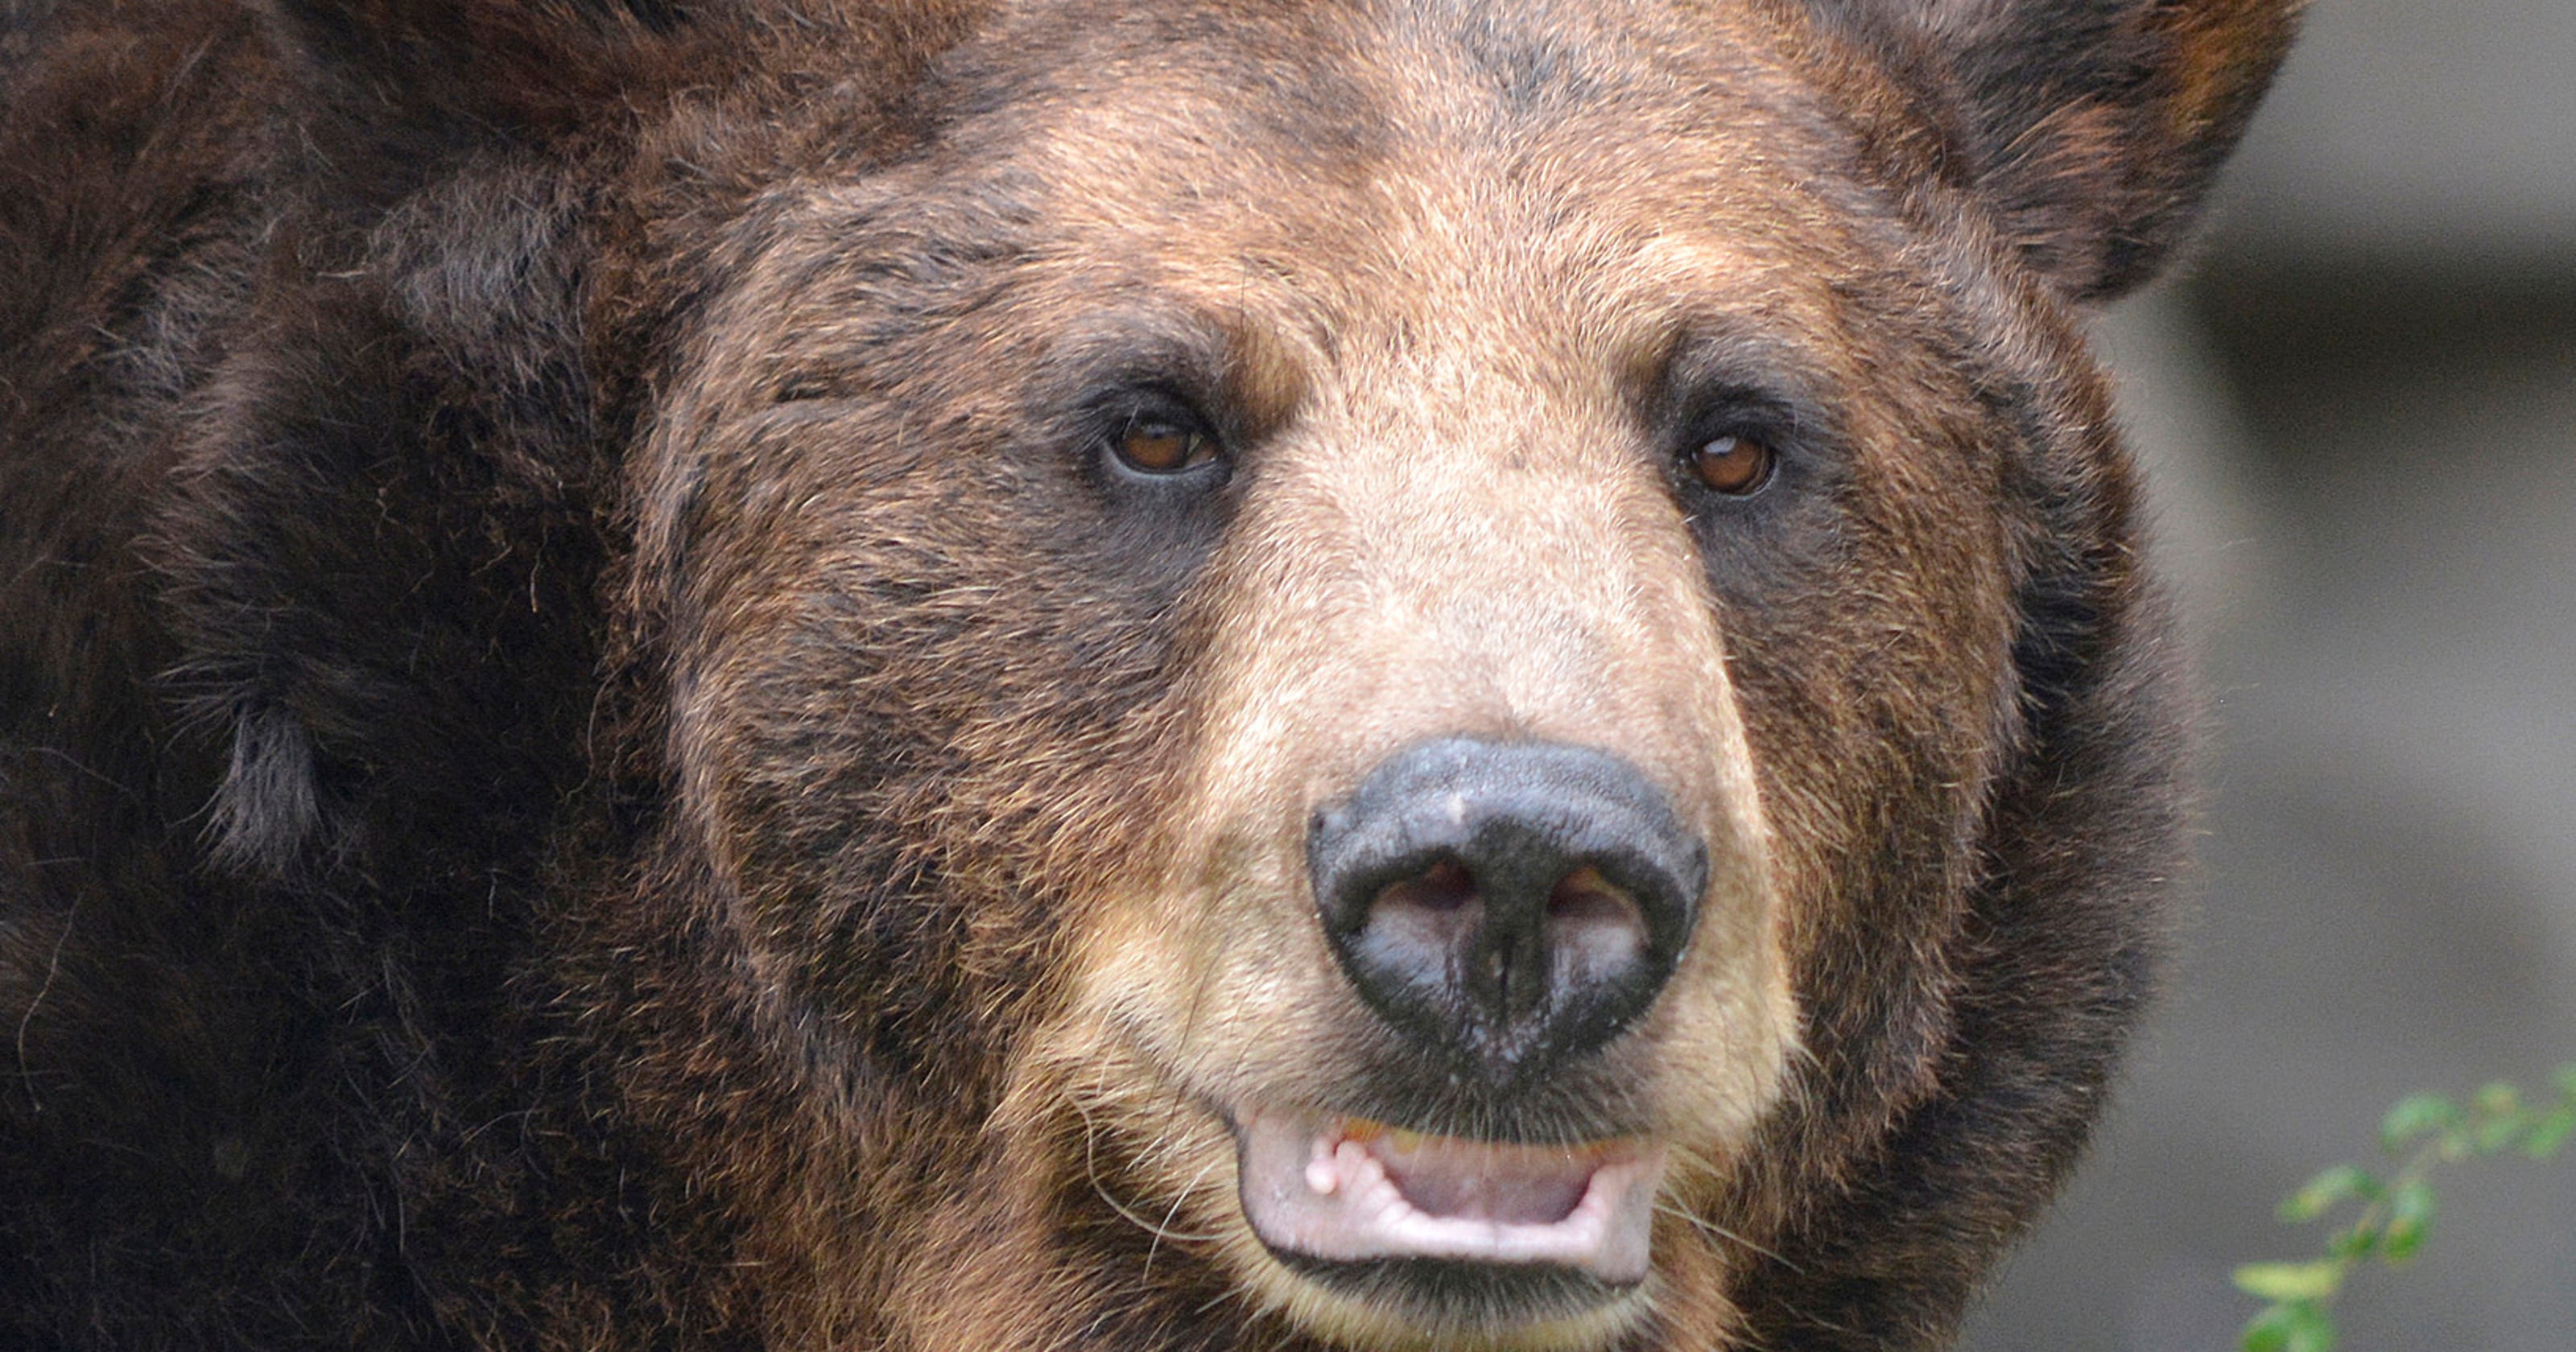 detroit-zoo-says-bye-to-black-and-brown-bears-expands-grizzly-display